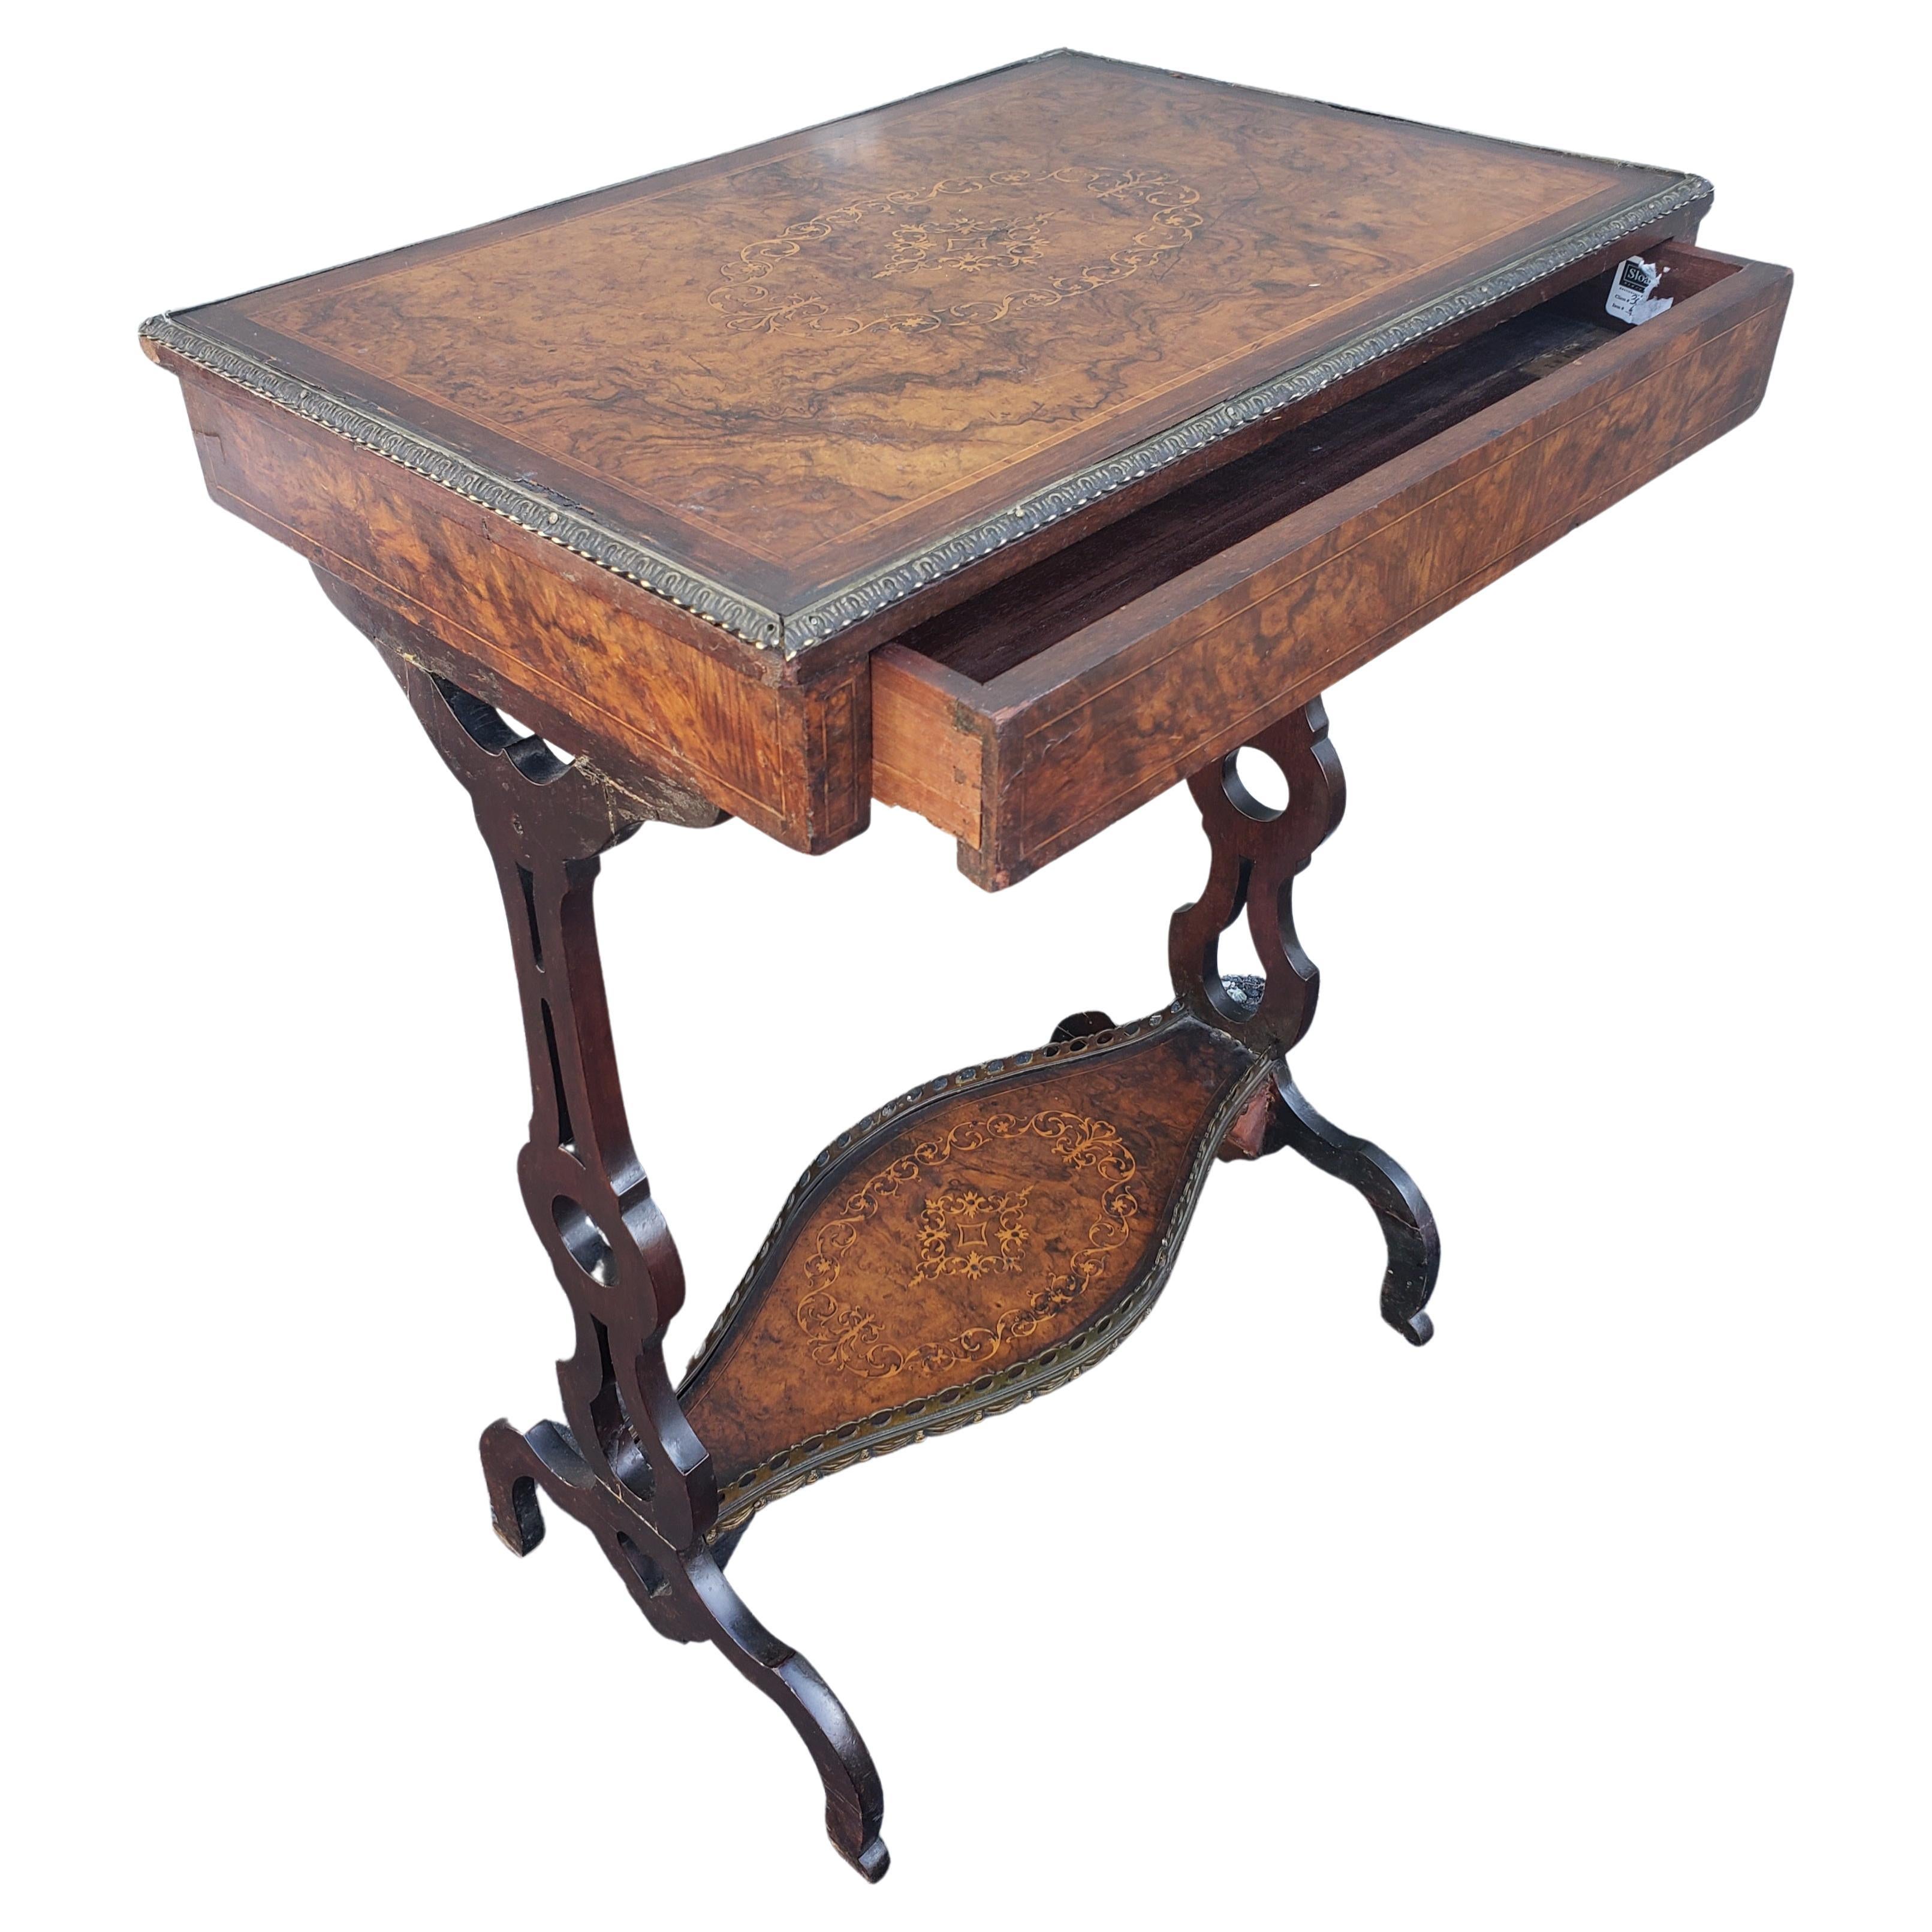 Early Victorian 1840s T.H. Filmer English Walnut Burl Tea Table with Metal Galleries